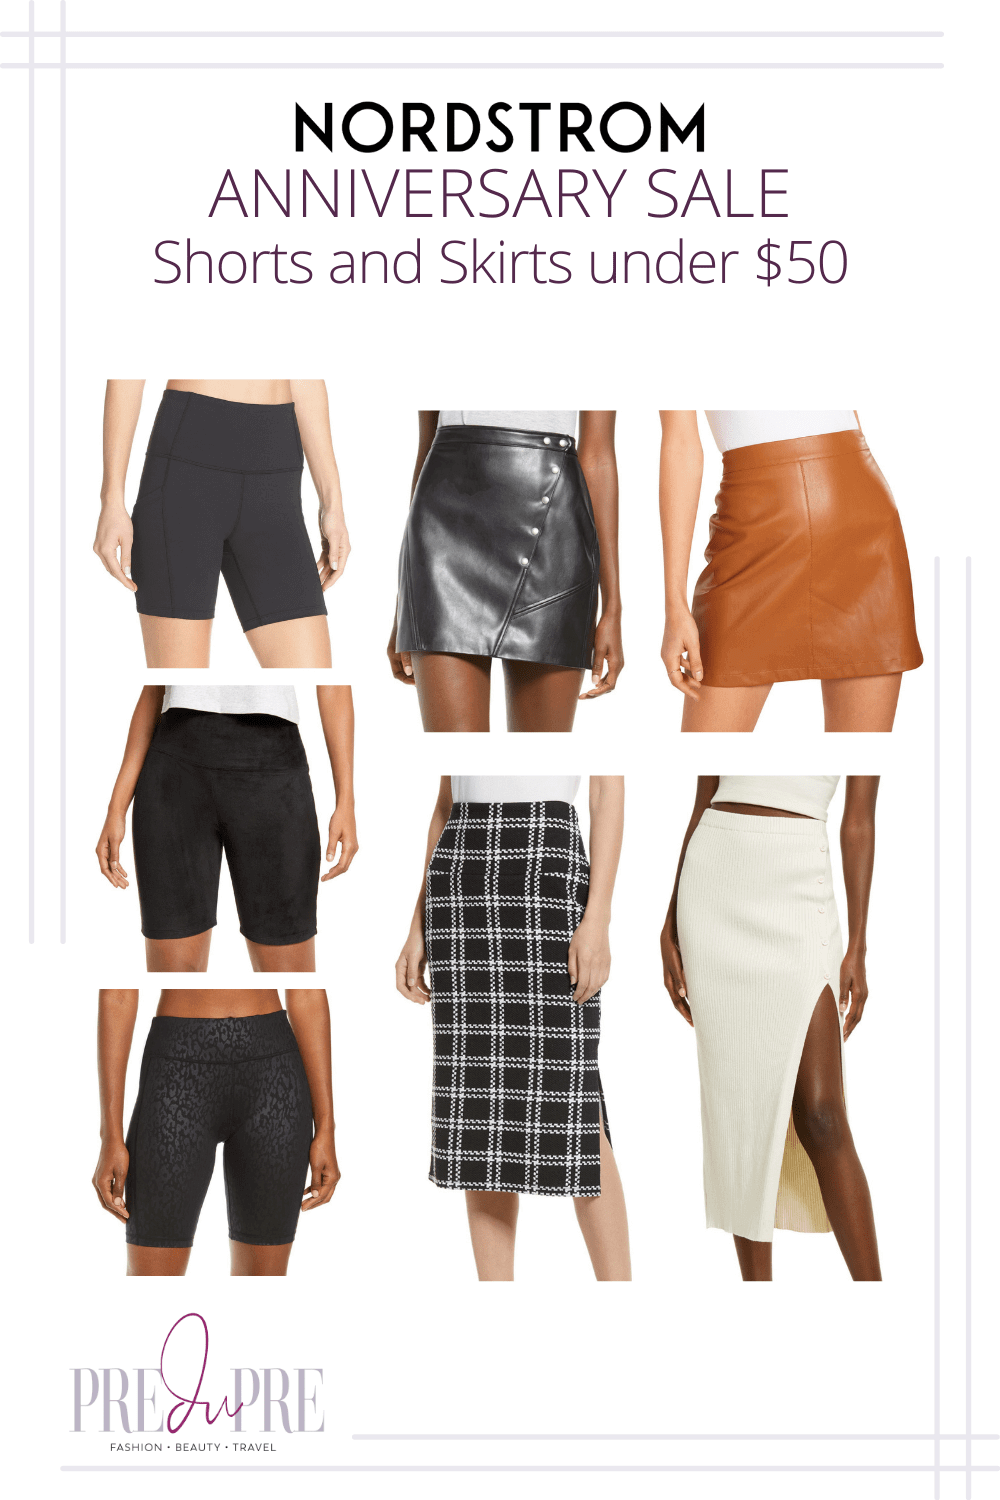 Nordstrom Anniversary Sale shorts and skirts under $50